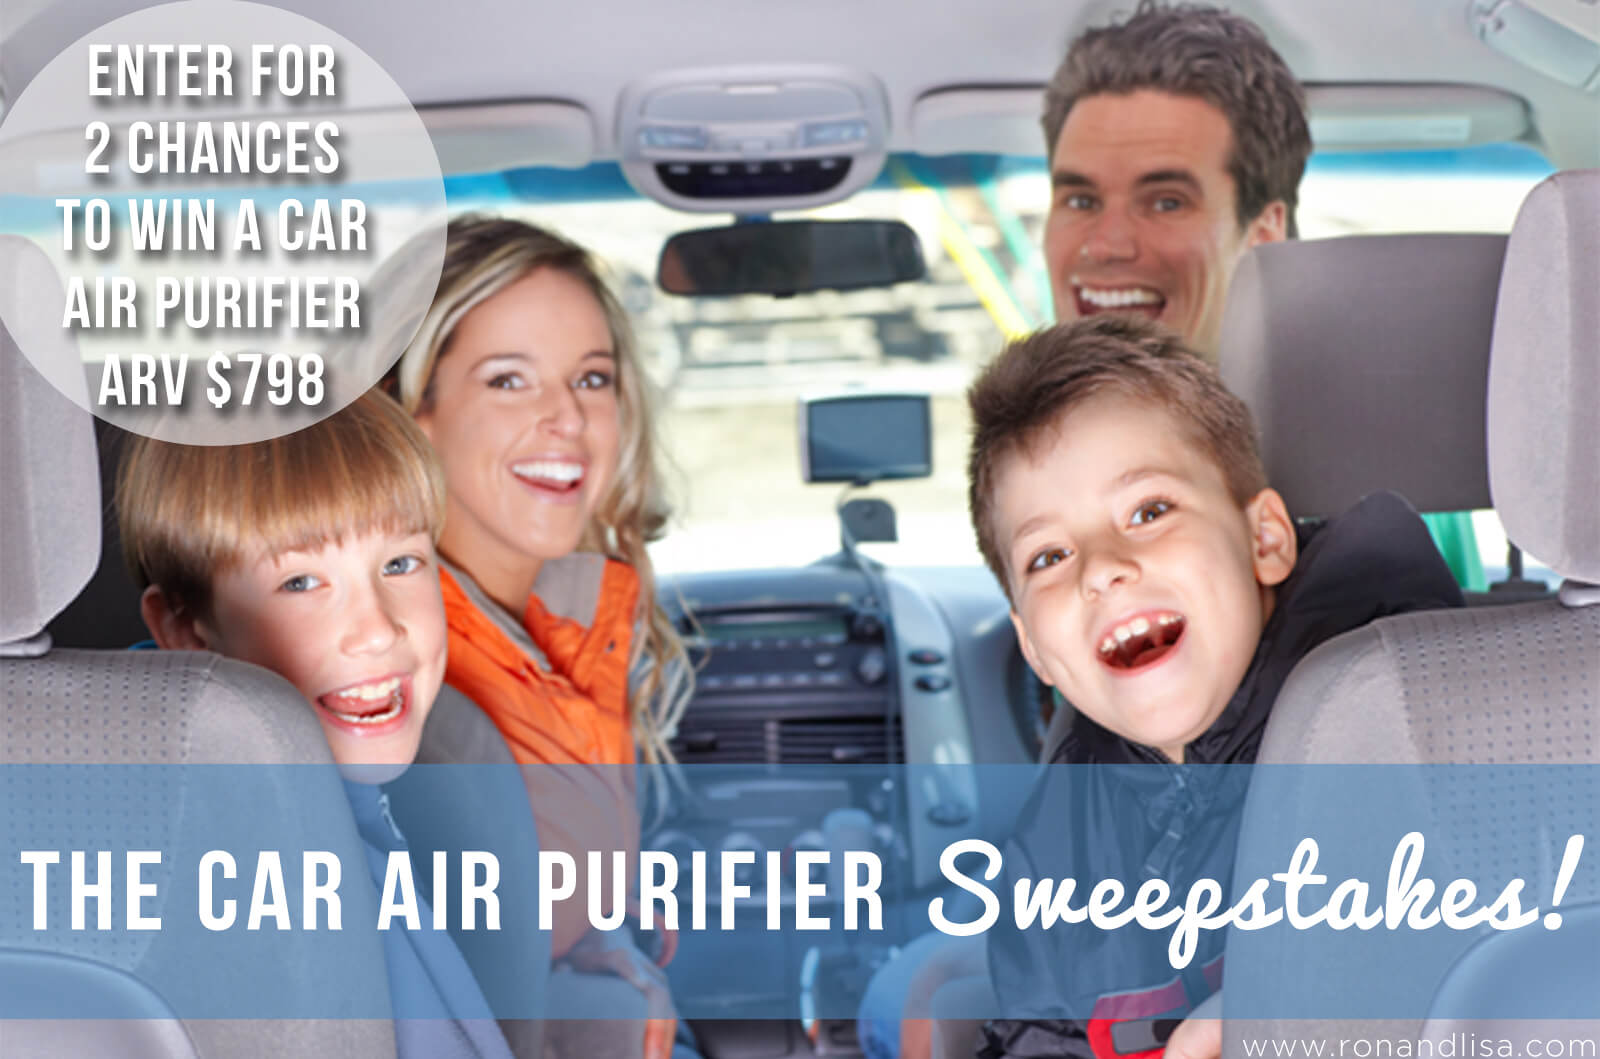 The Car Air Purifier Sweepstakes!